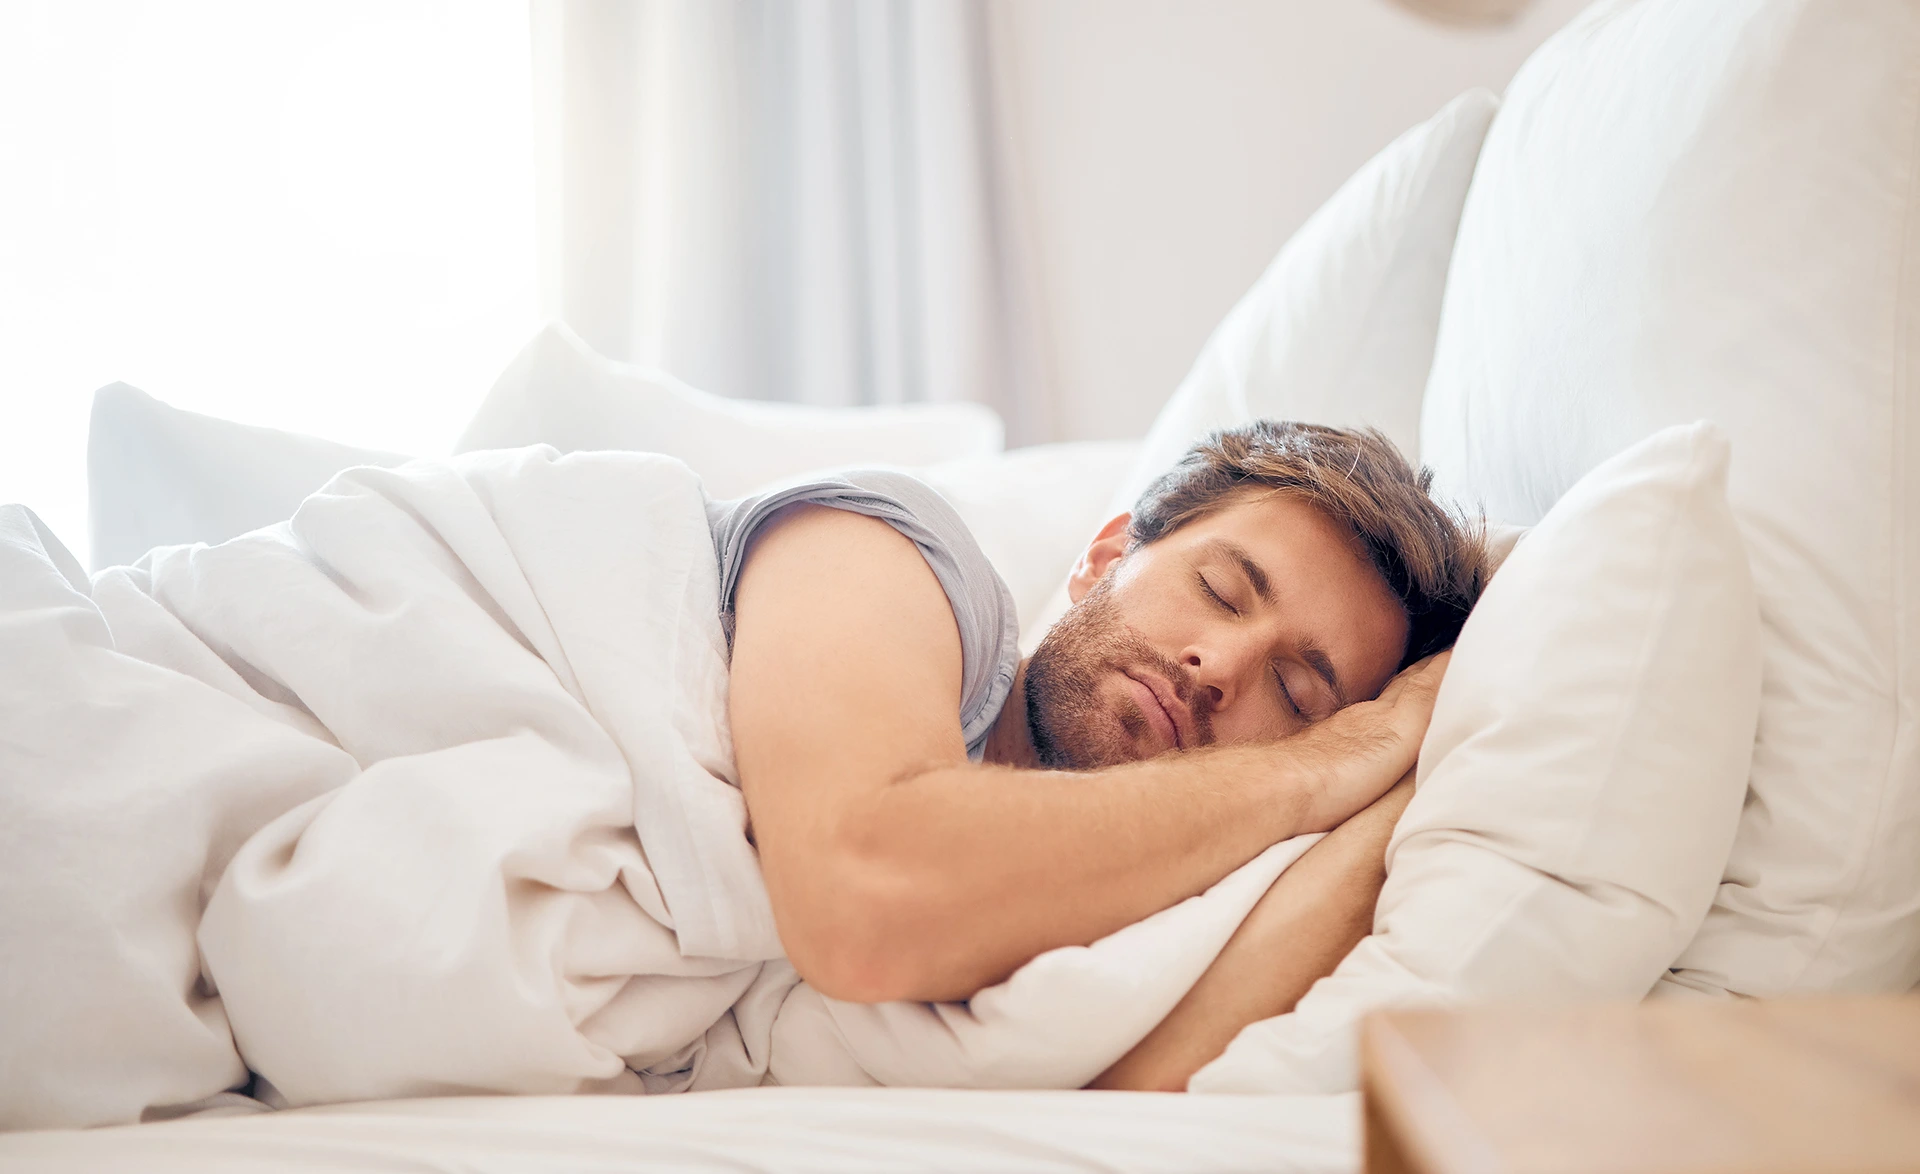 testosterone replacement therapy and sleep apnea